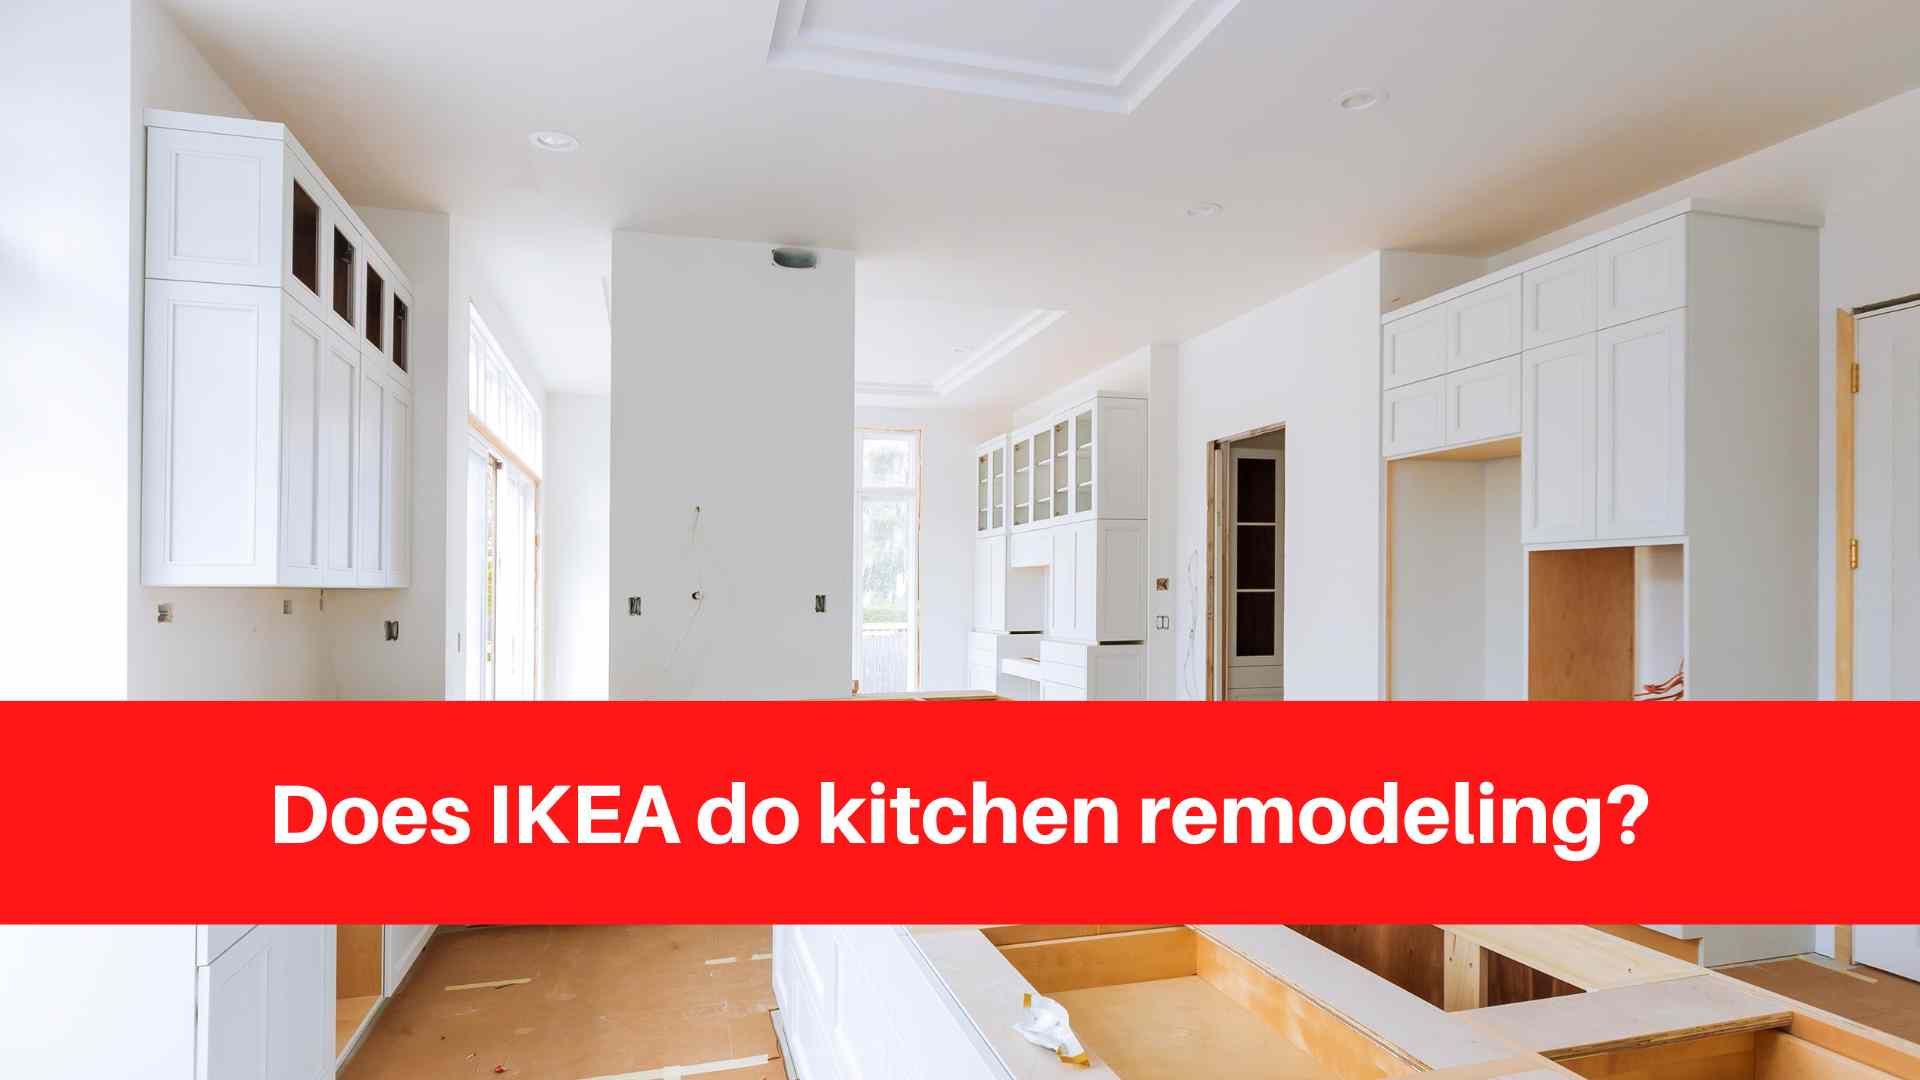 Does IKEA do kitchen remodeling